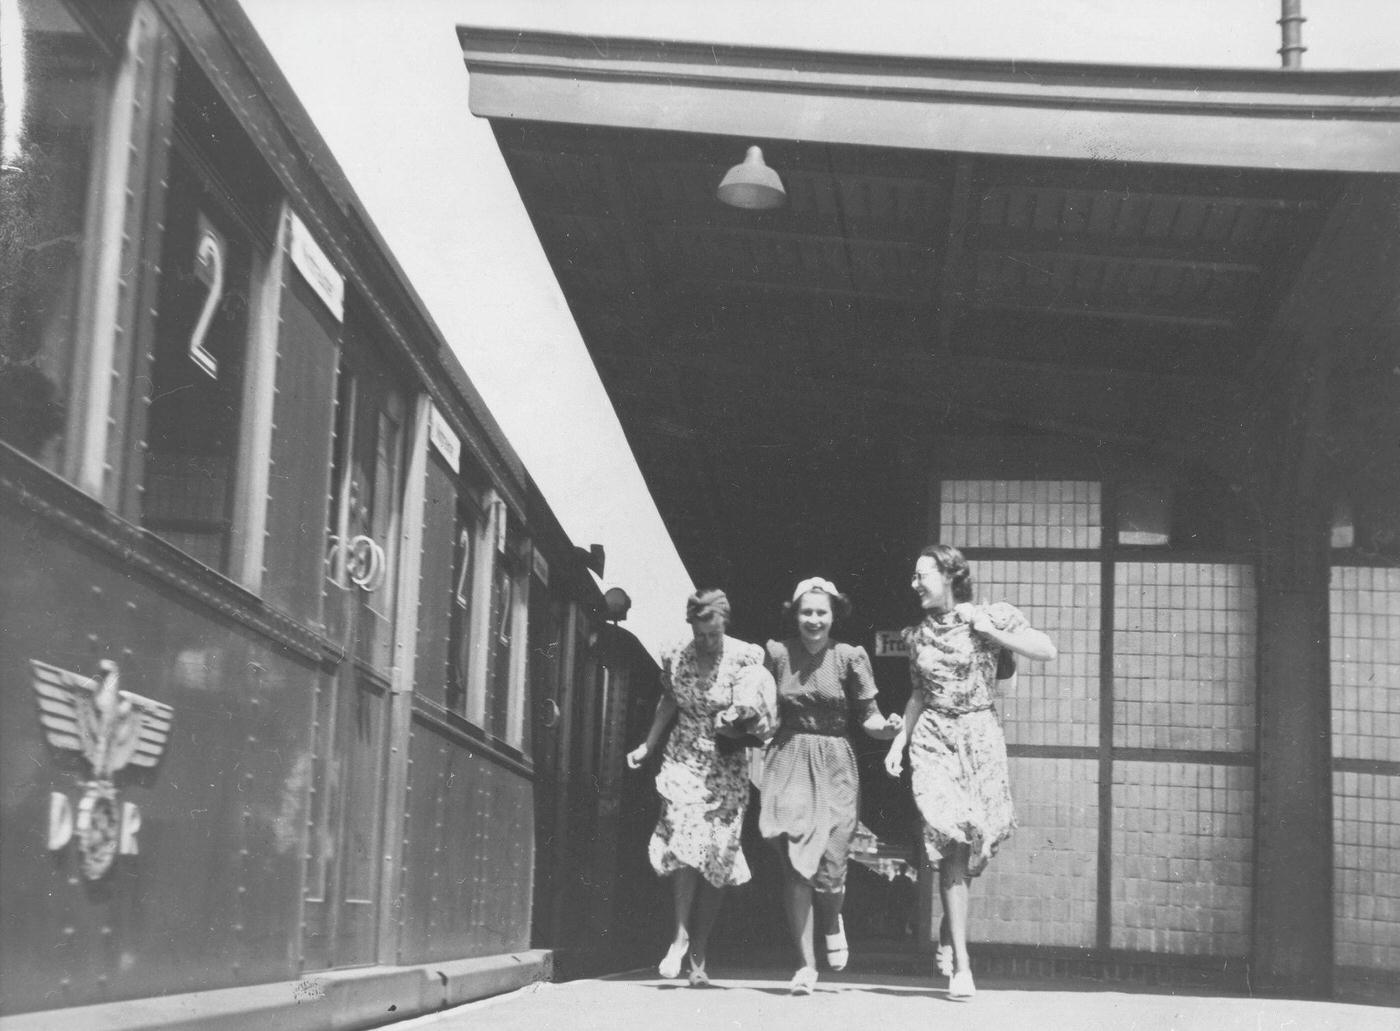 Young women at an S-Bahn station in Berlin, 1940.